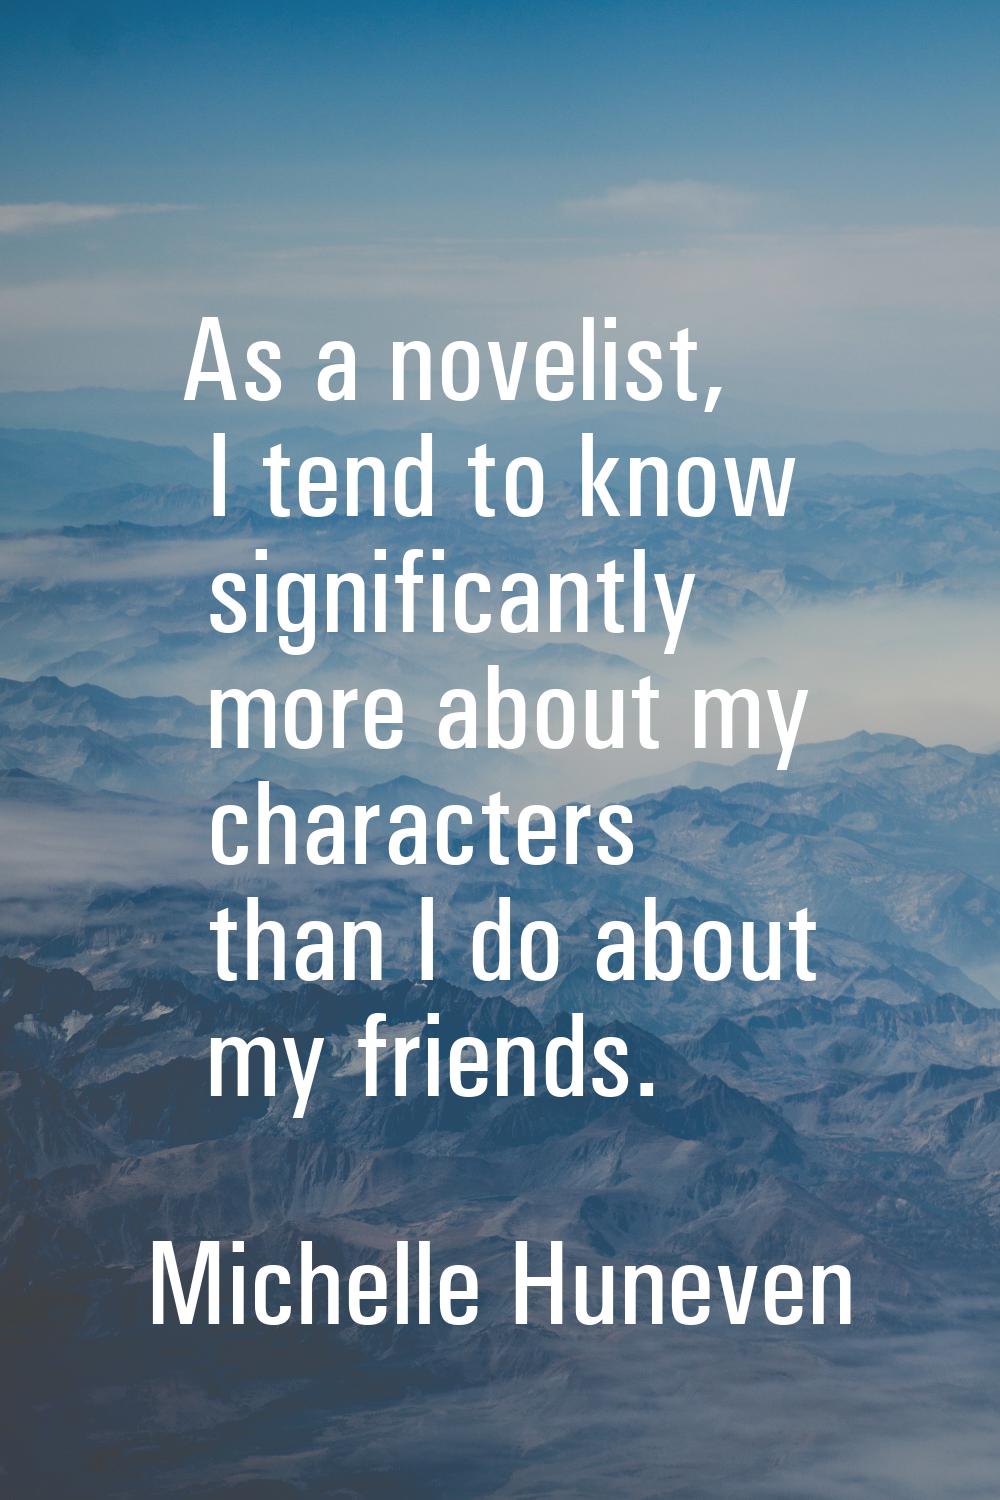 As a novelist, I tend to know significantly more about my characters than I do about my friends.